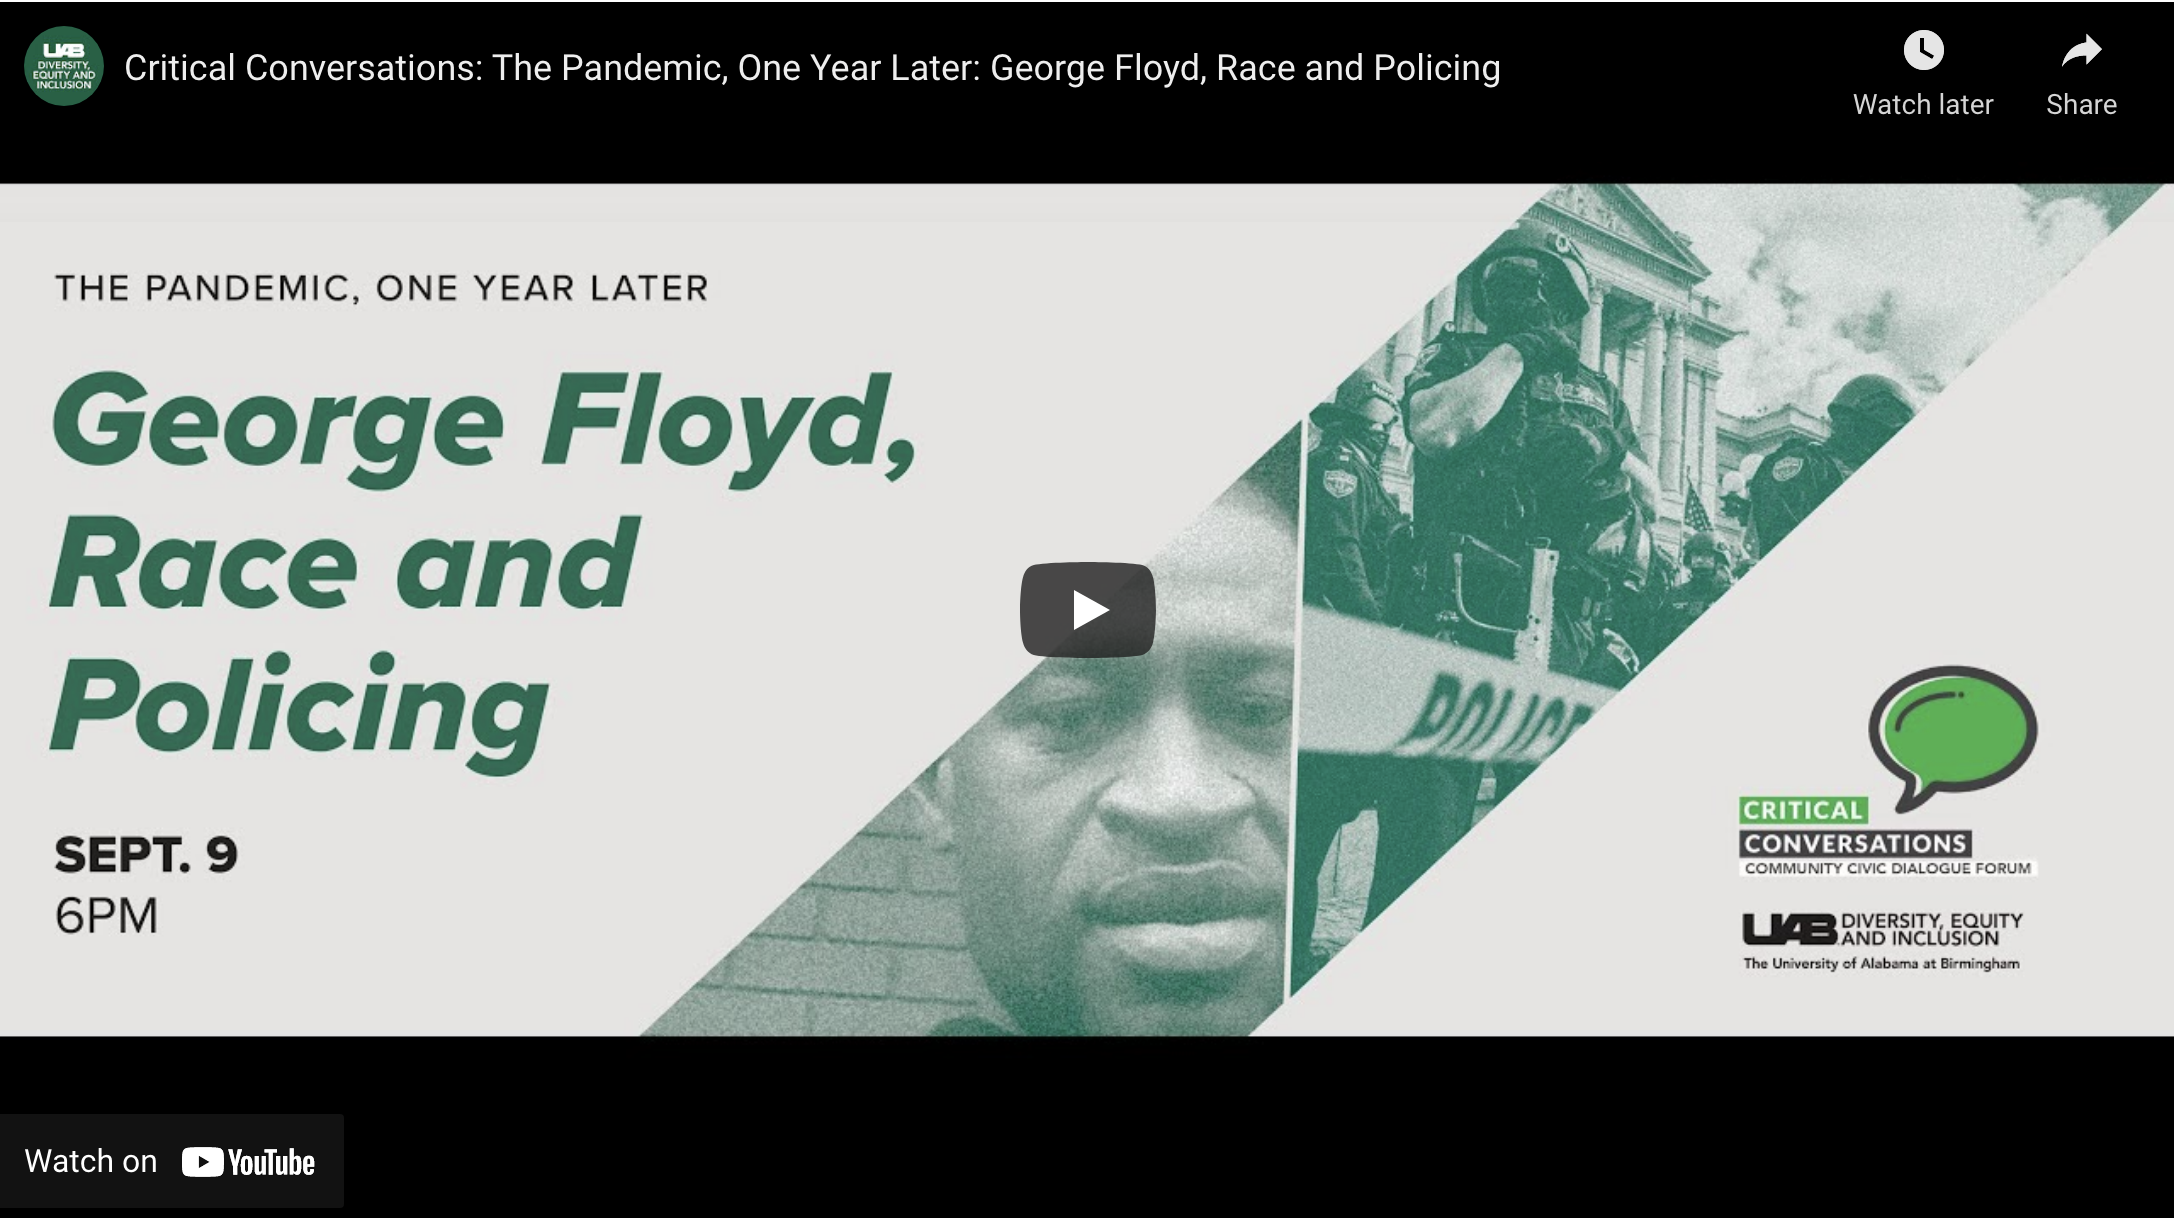 Critical Conversations: The Pandemic, One Year Later: George Floyd, Race and Policing